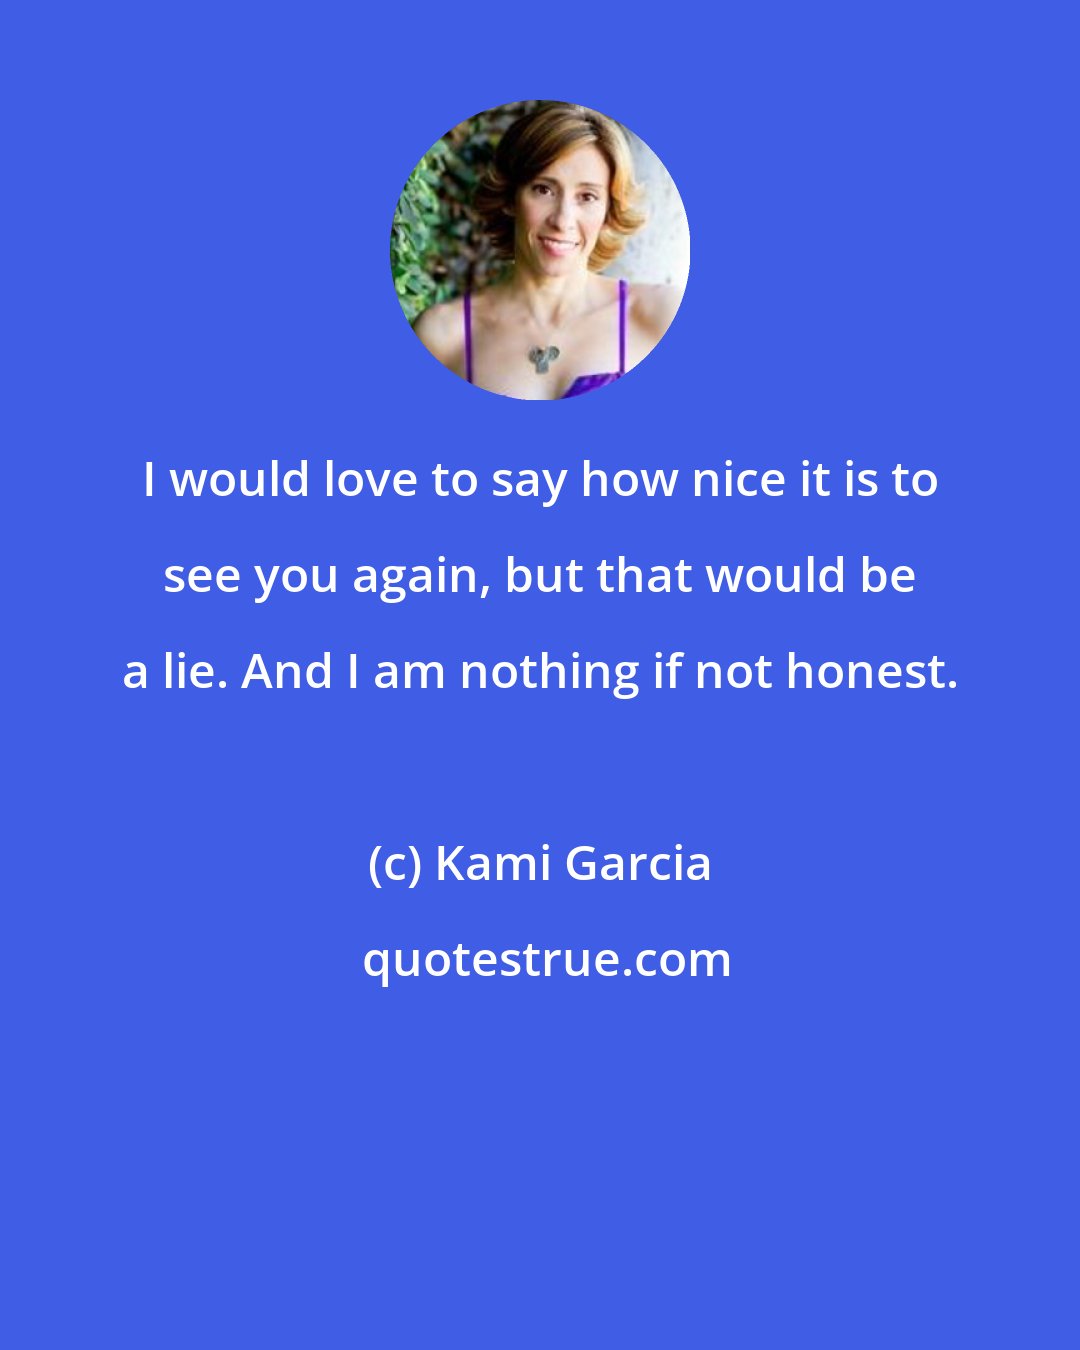 Kami Garcia: I would love to say how nice it is to see you again, but that would be a lie. And I am nothing if not honest.